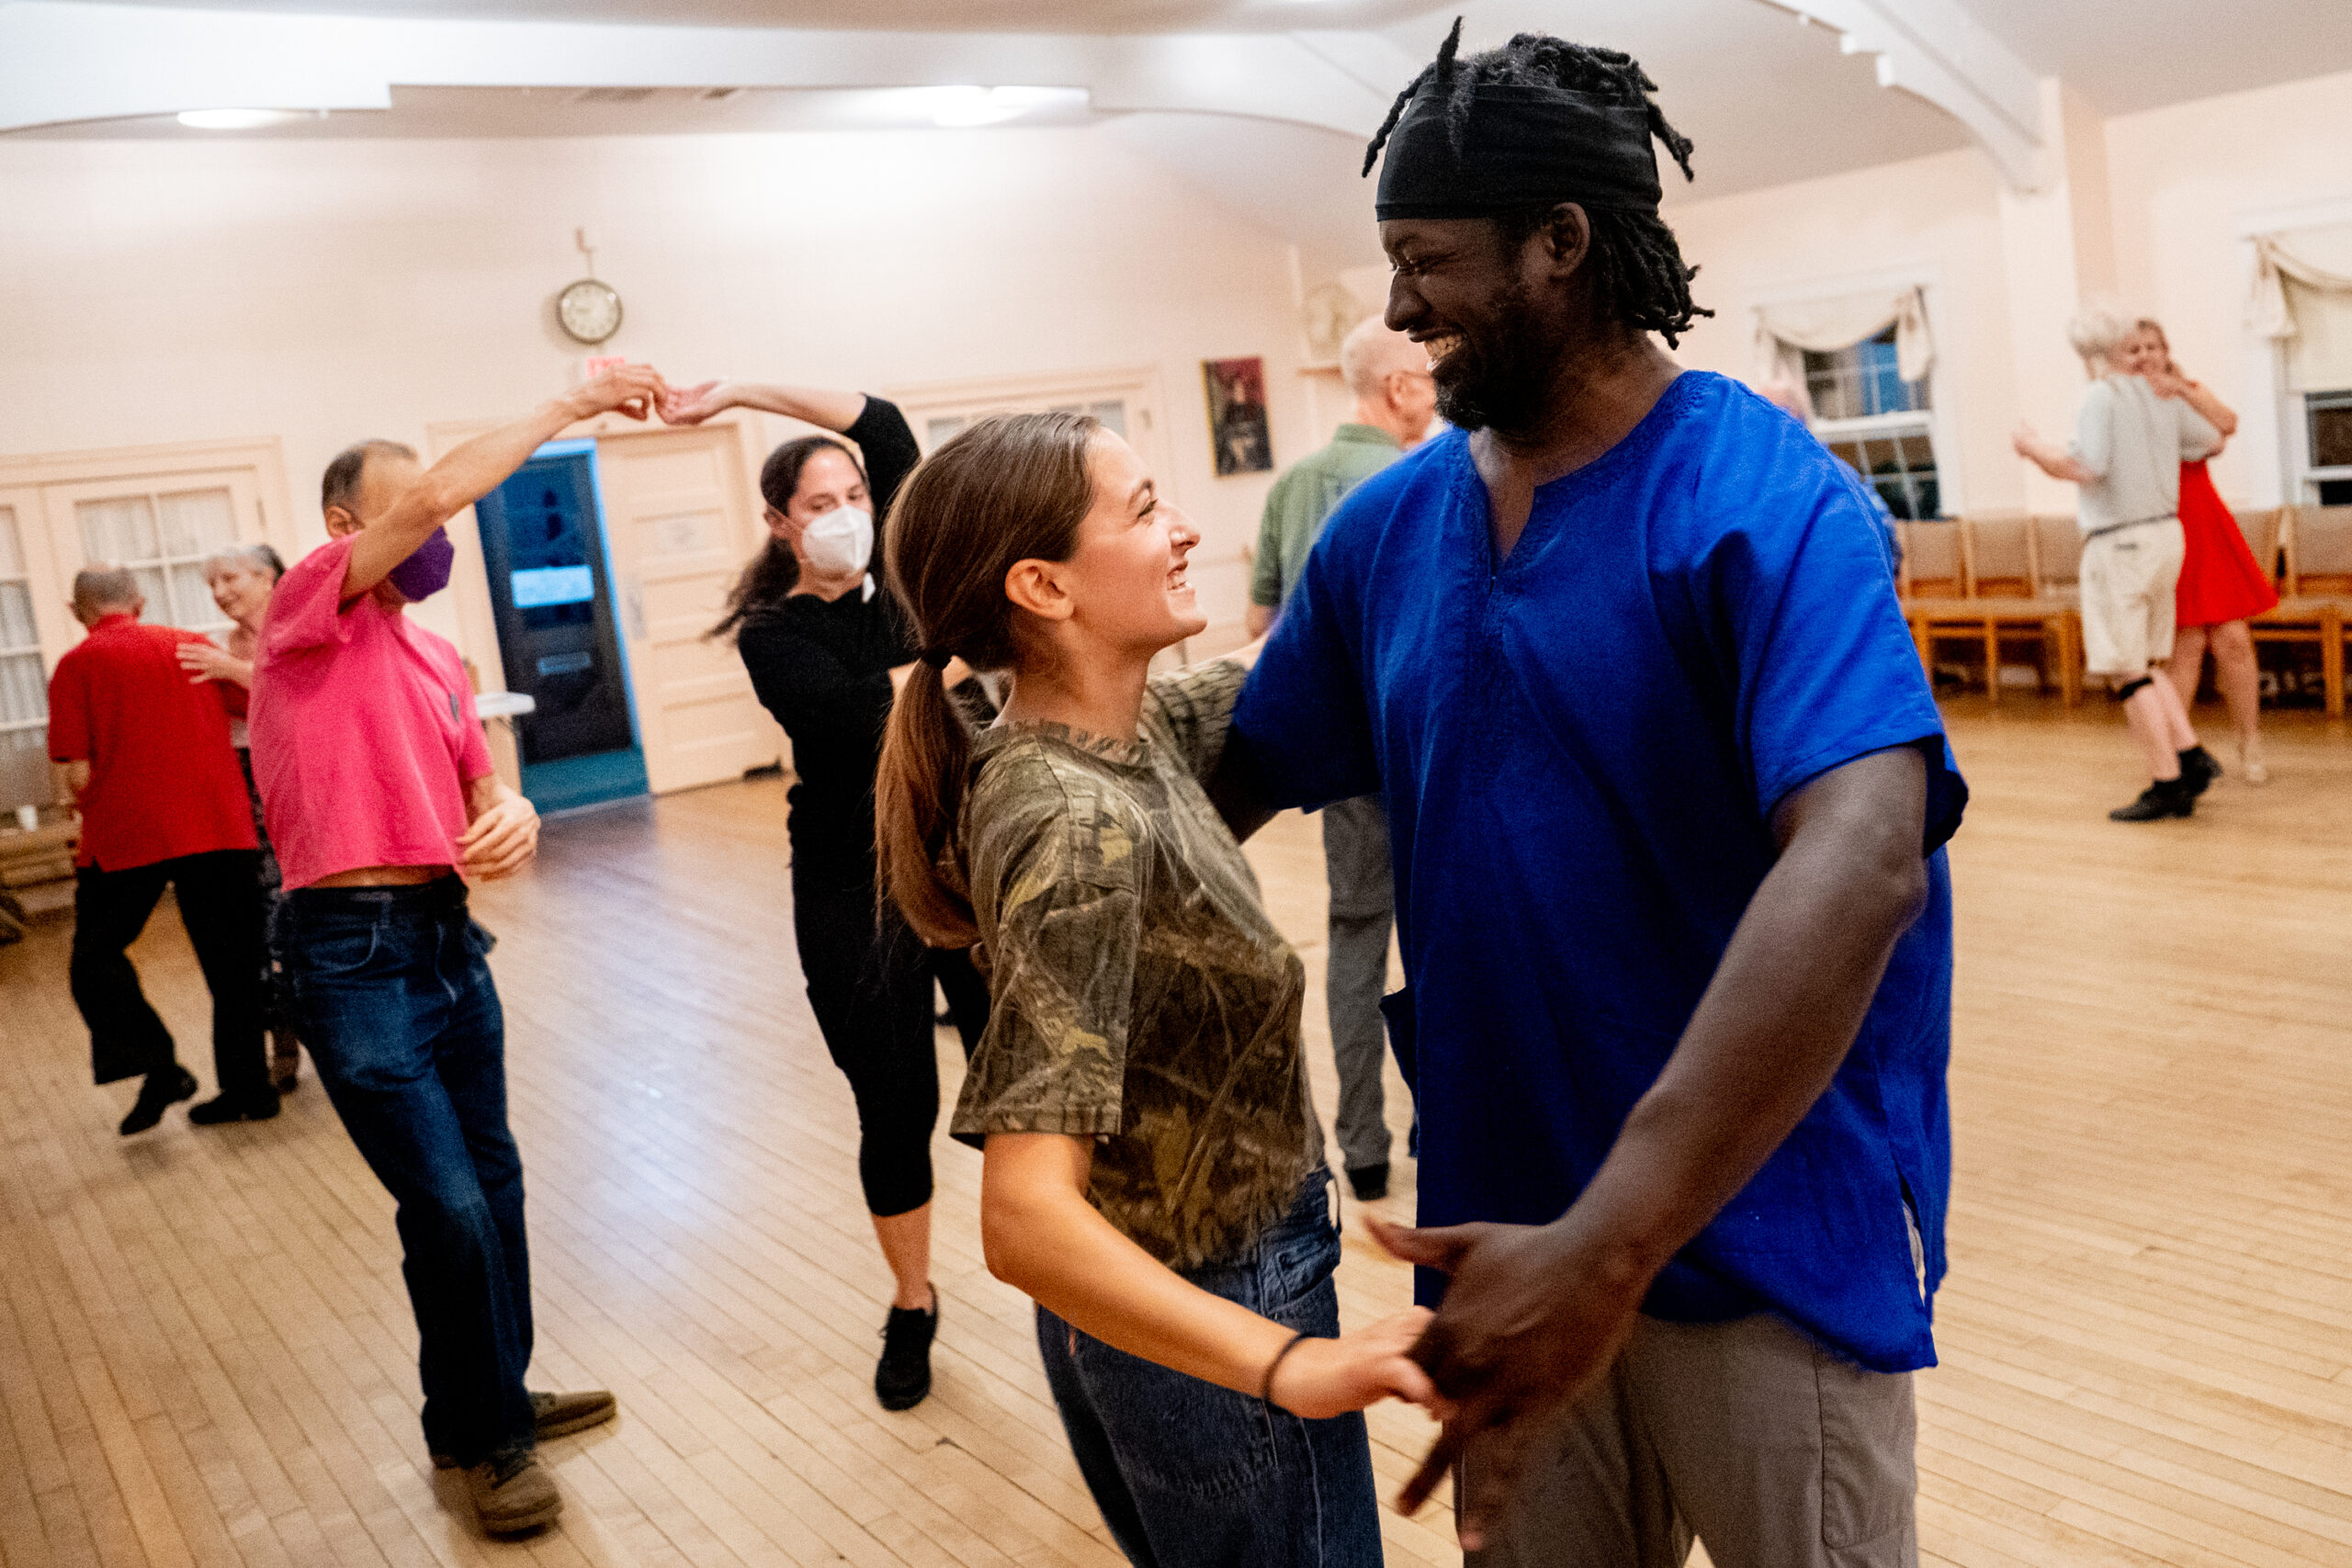 A Black man in his early 40s in a blue shirt dances with a white woman in her 20s wearing a camouflage shirt.